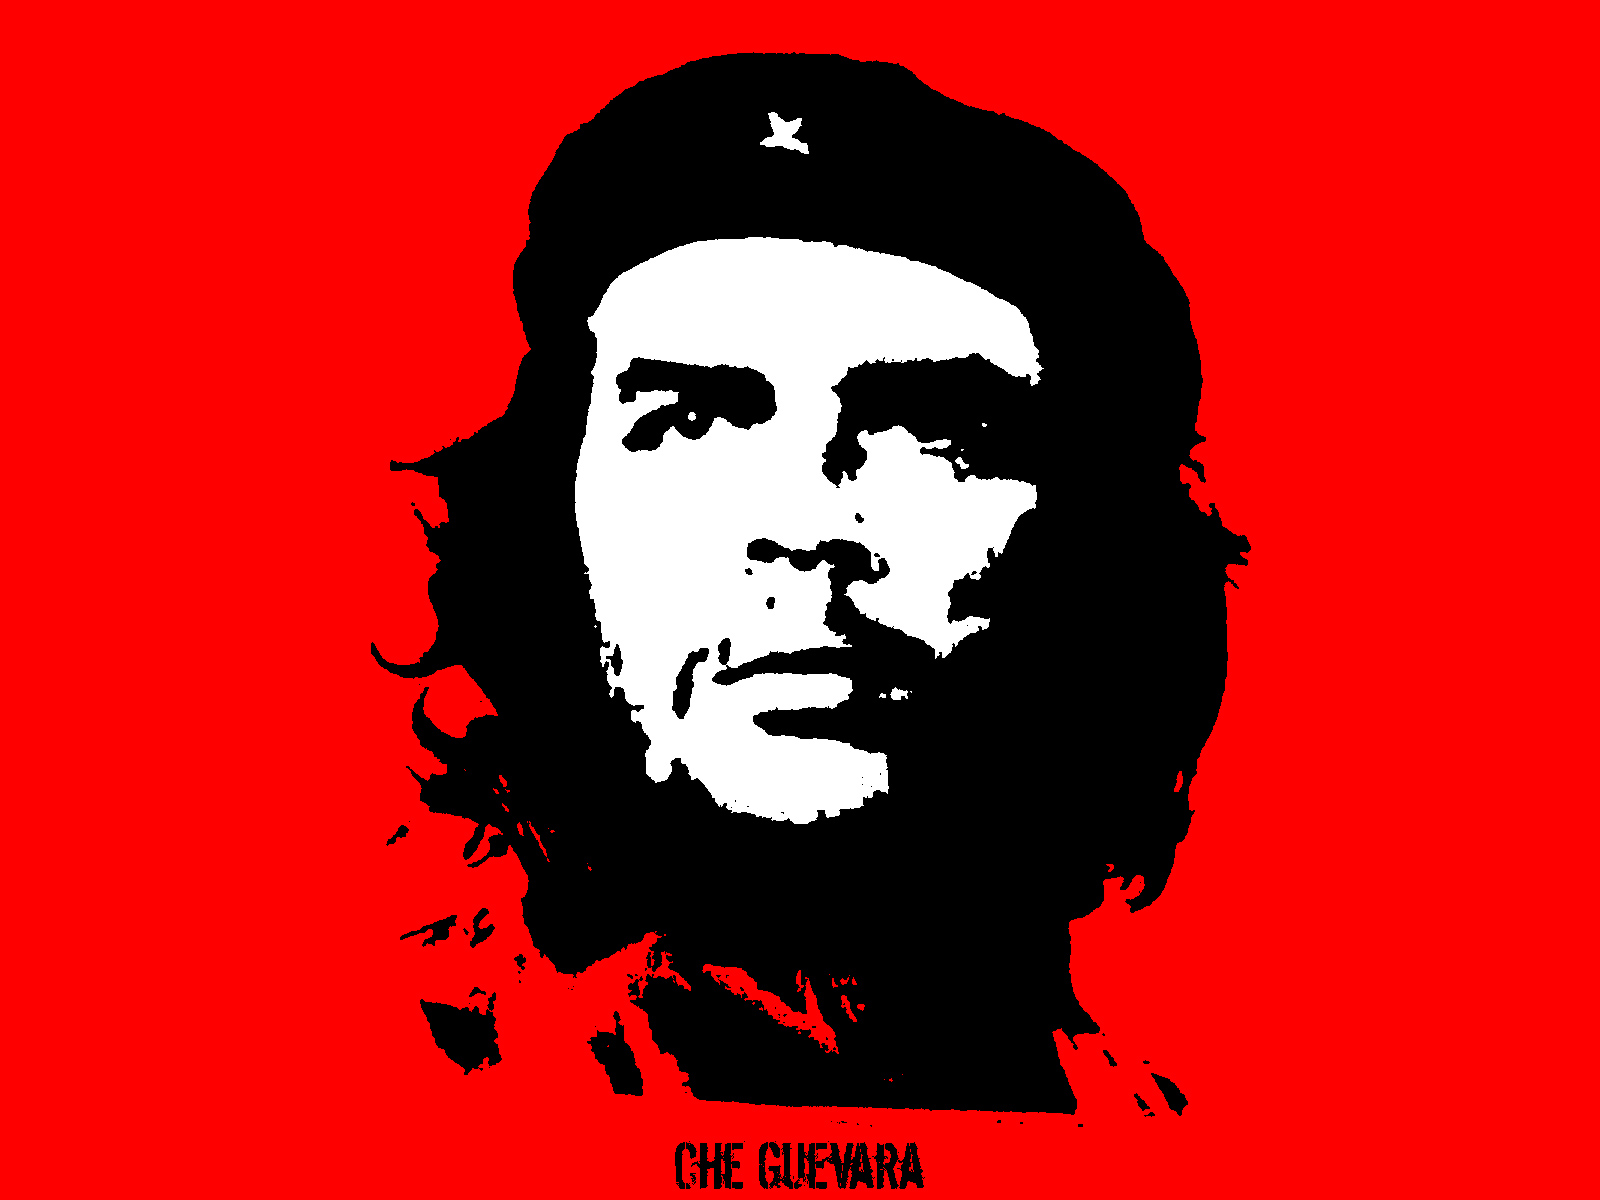 Che, Tania and the guerrillas in Bolivia are sources of inspiration today.